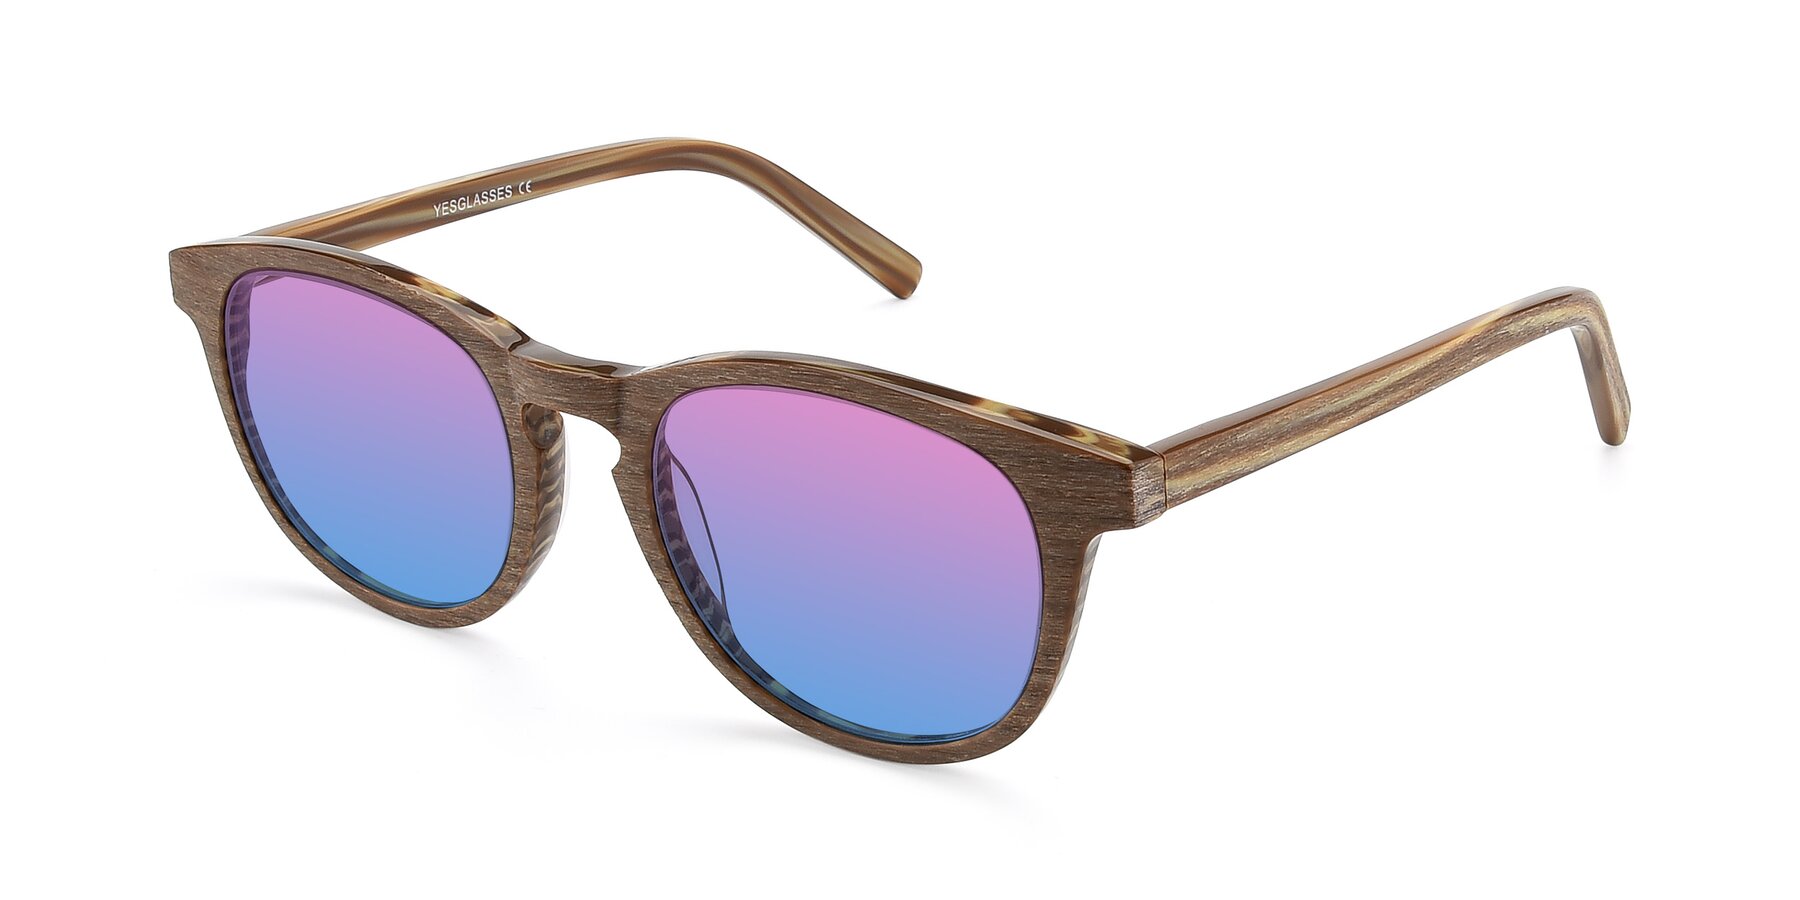 Angle of SR6044 in Brown-Wooden with Pink / Blue Gradient Lenses